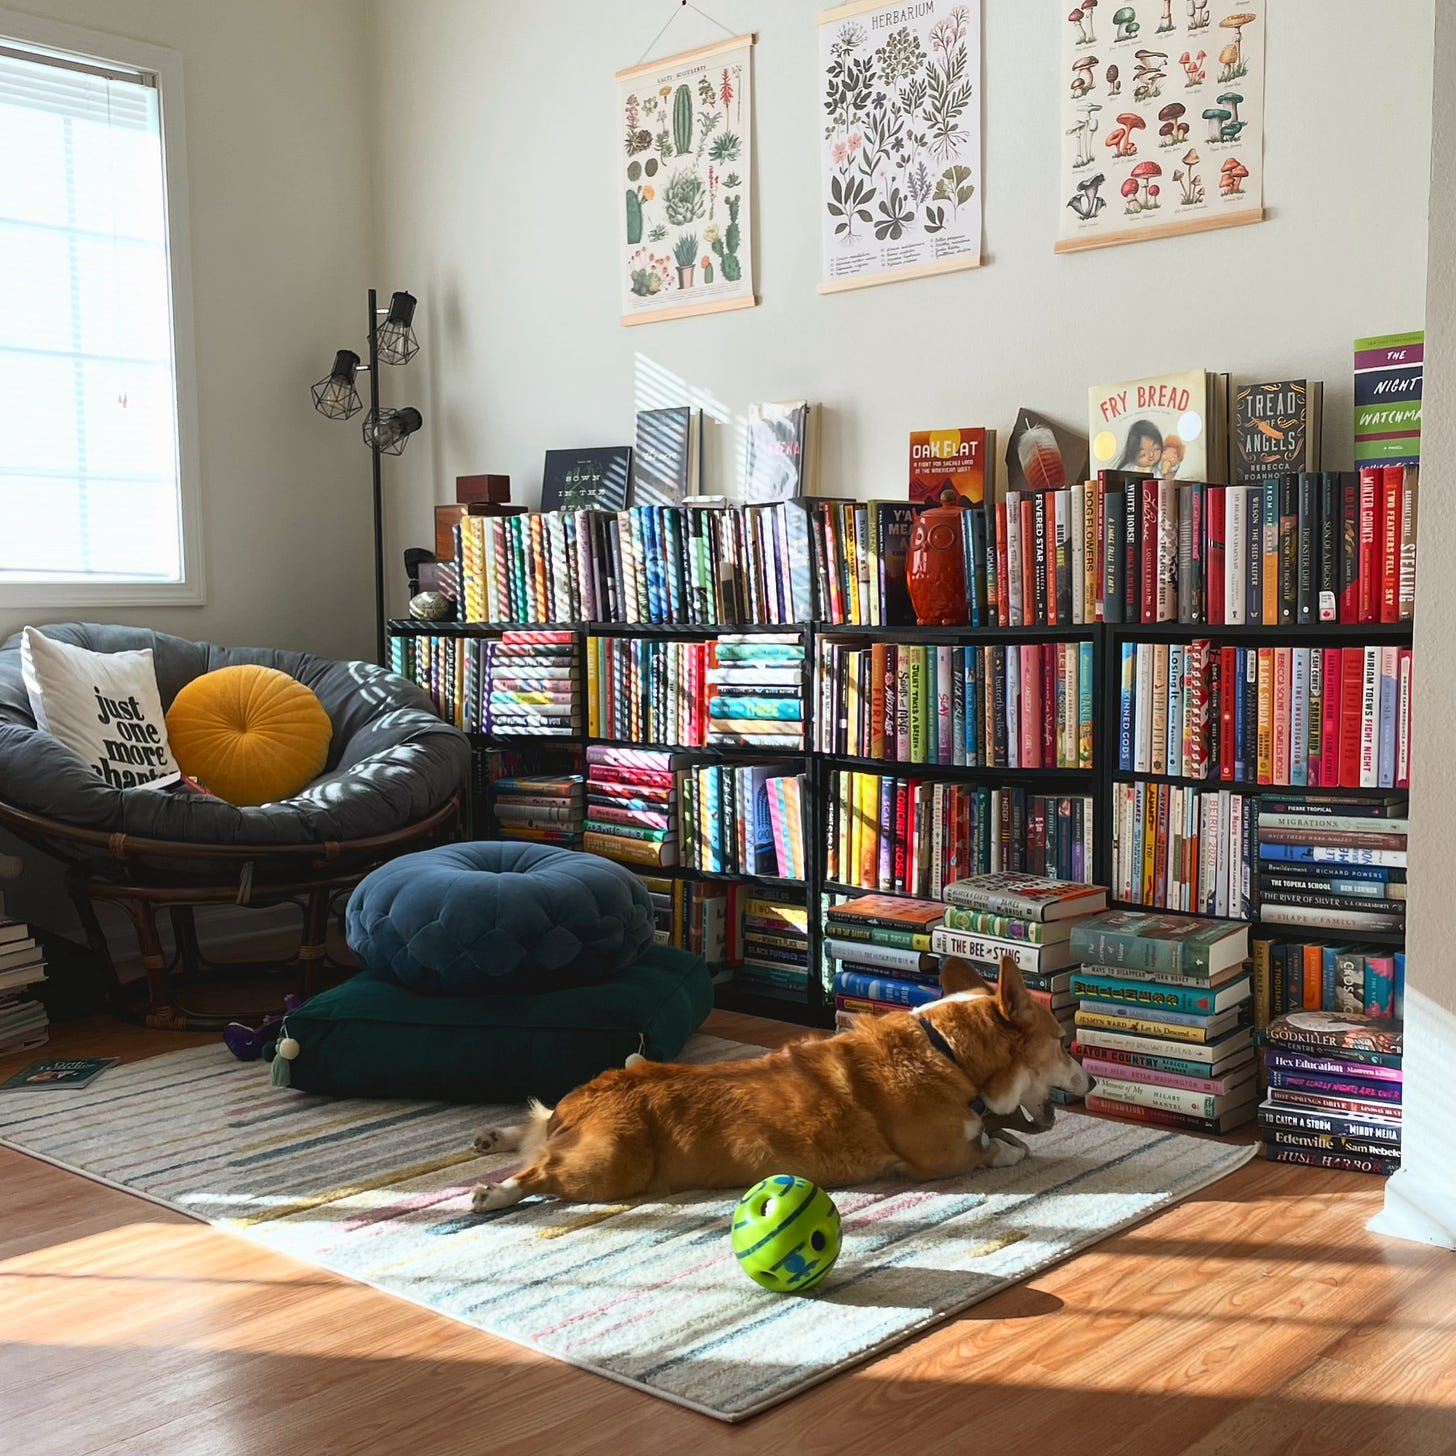 a photo take from the cross the room from the library corner. Dylan, a red and white Pembroke Welsh Corgi, lies on a multi-colored Carpet chewing a toy. His favorite green giggle ball sits beside him. Behind him is a row of bookshelves.